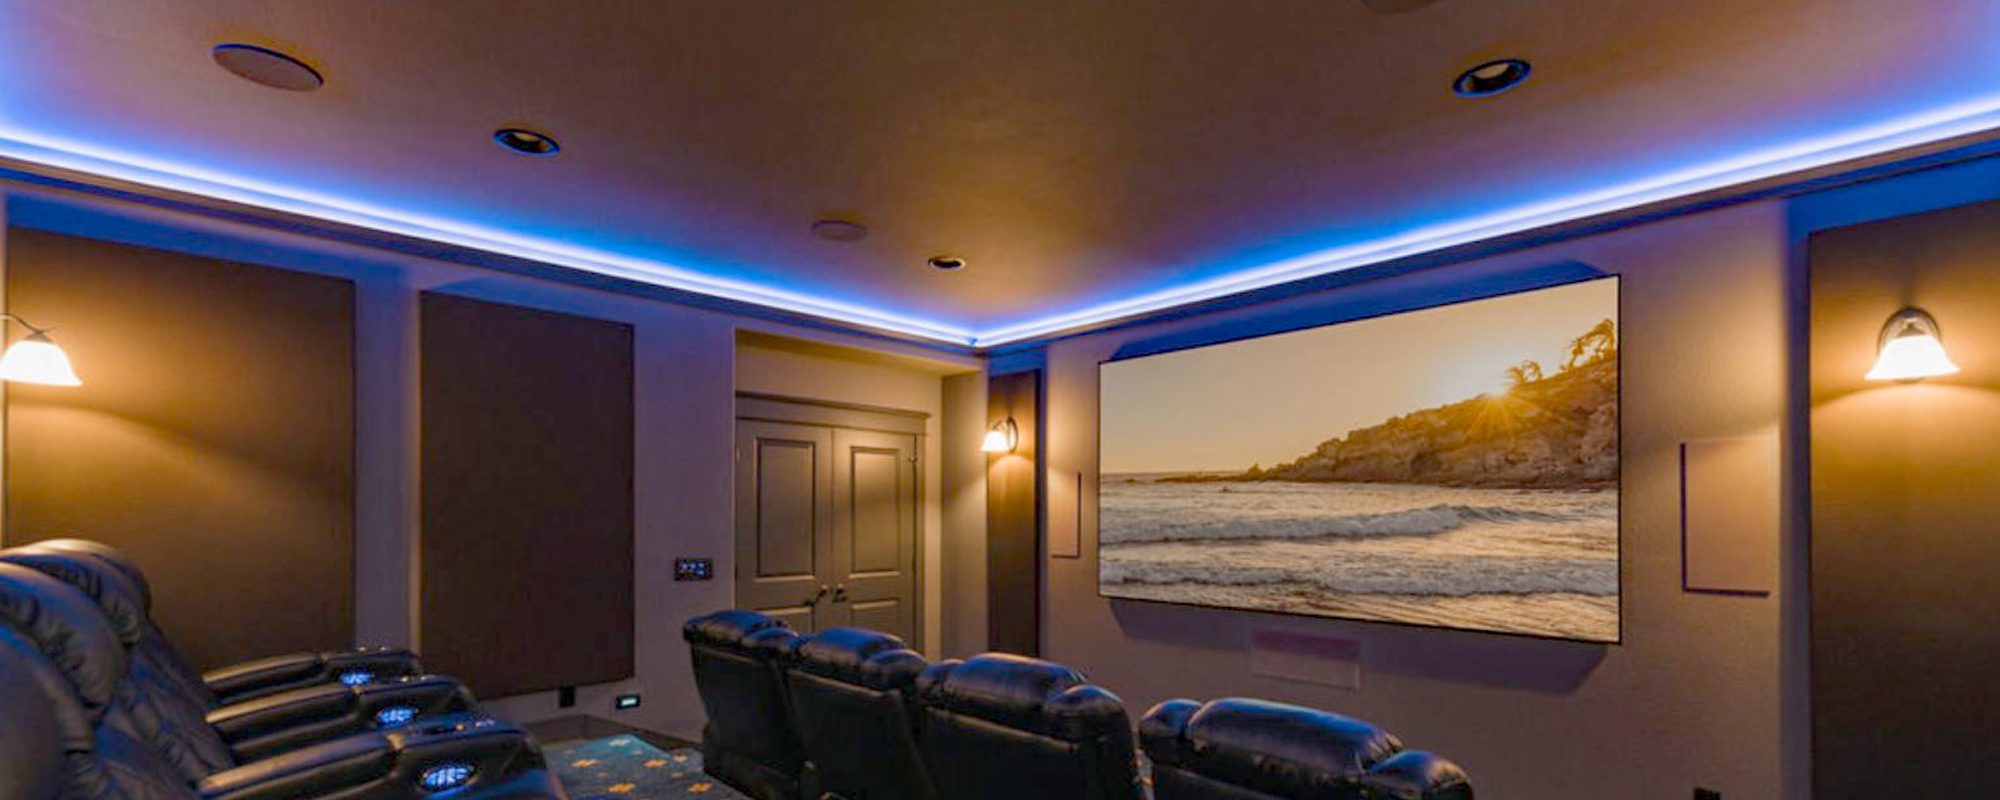 Large screen media room with projector, designed and installed by Home Systems